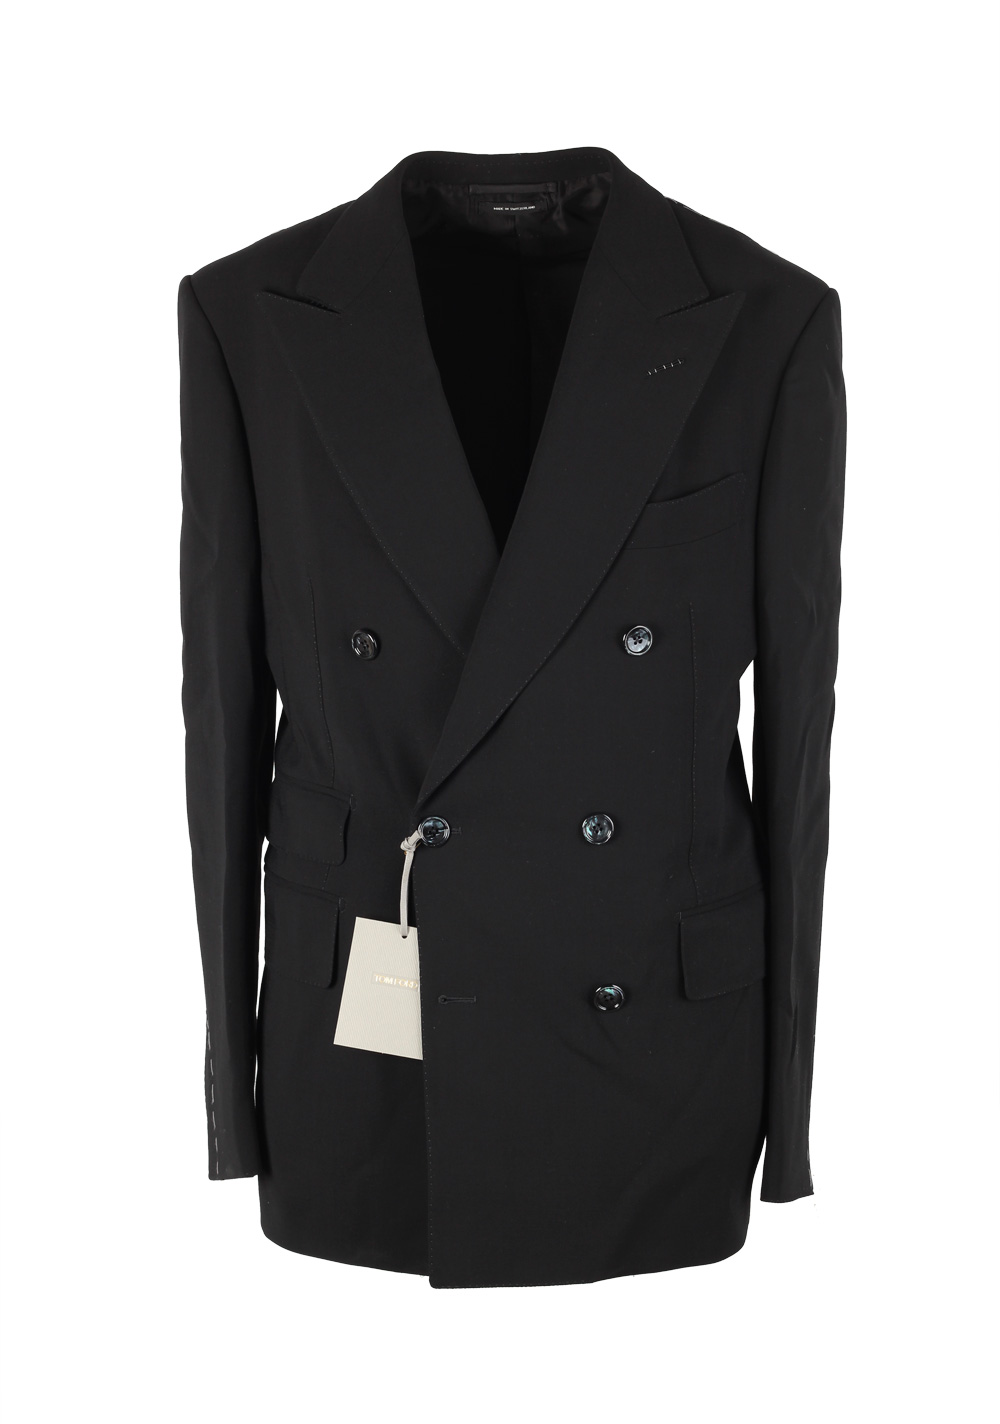 TOM FORD Shelton Double Breasted Solid Black Suit Size 46 / 36R U.S ...